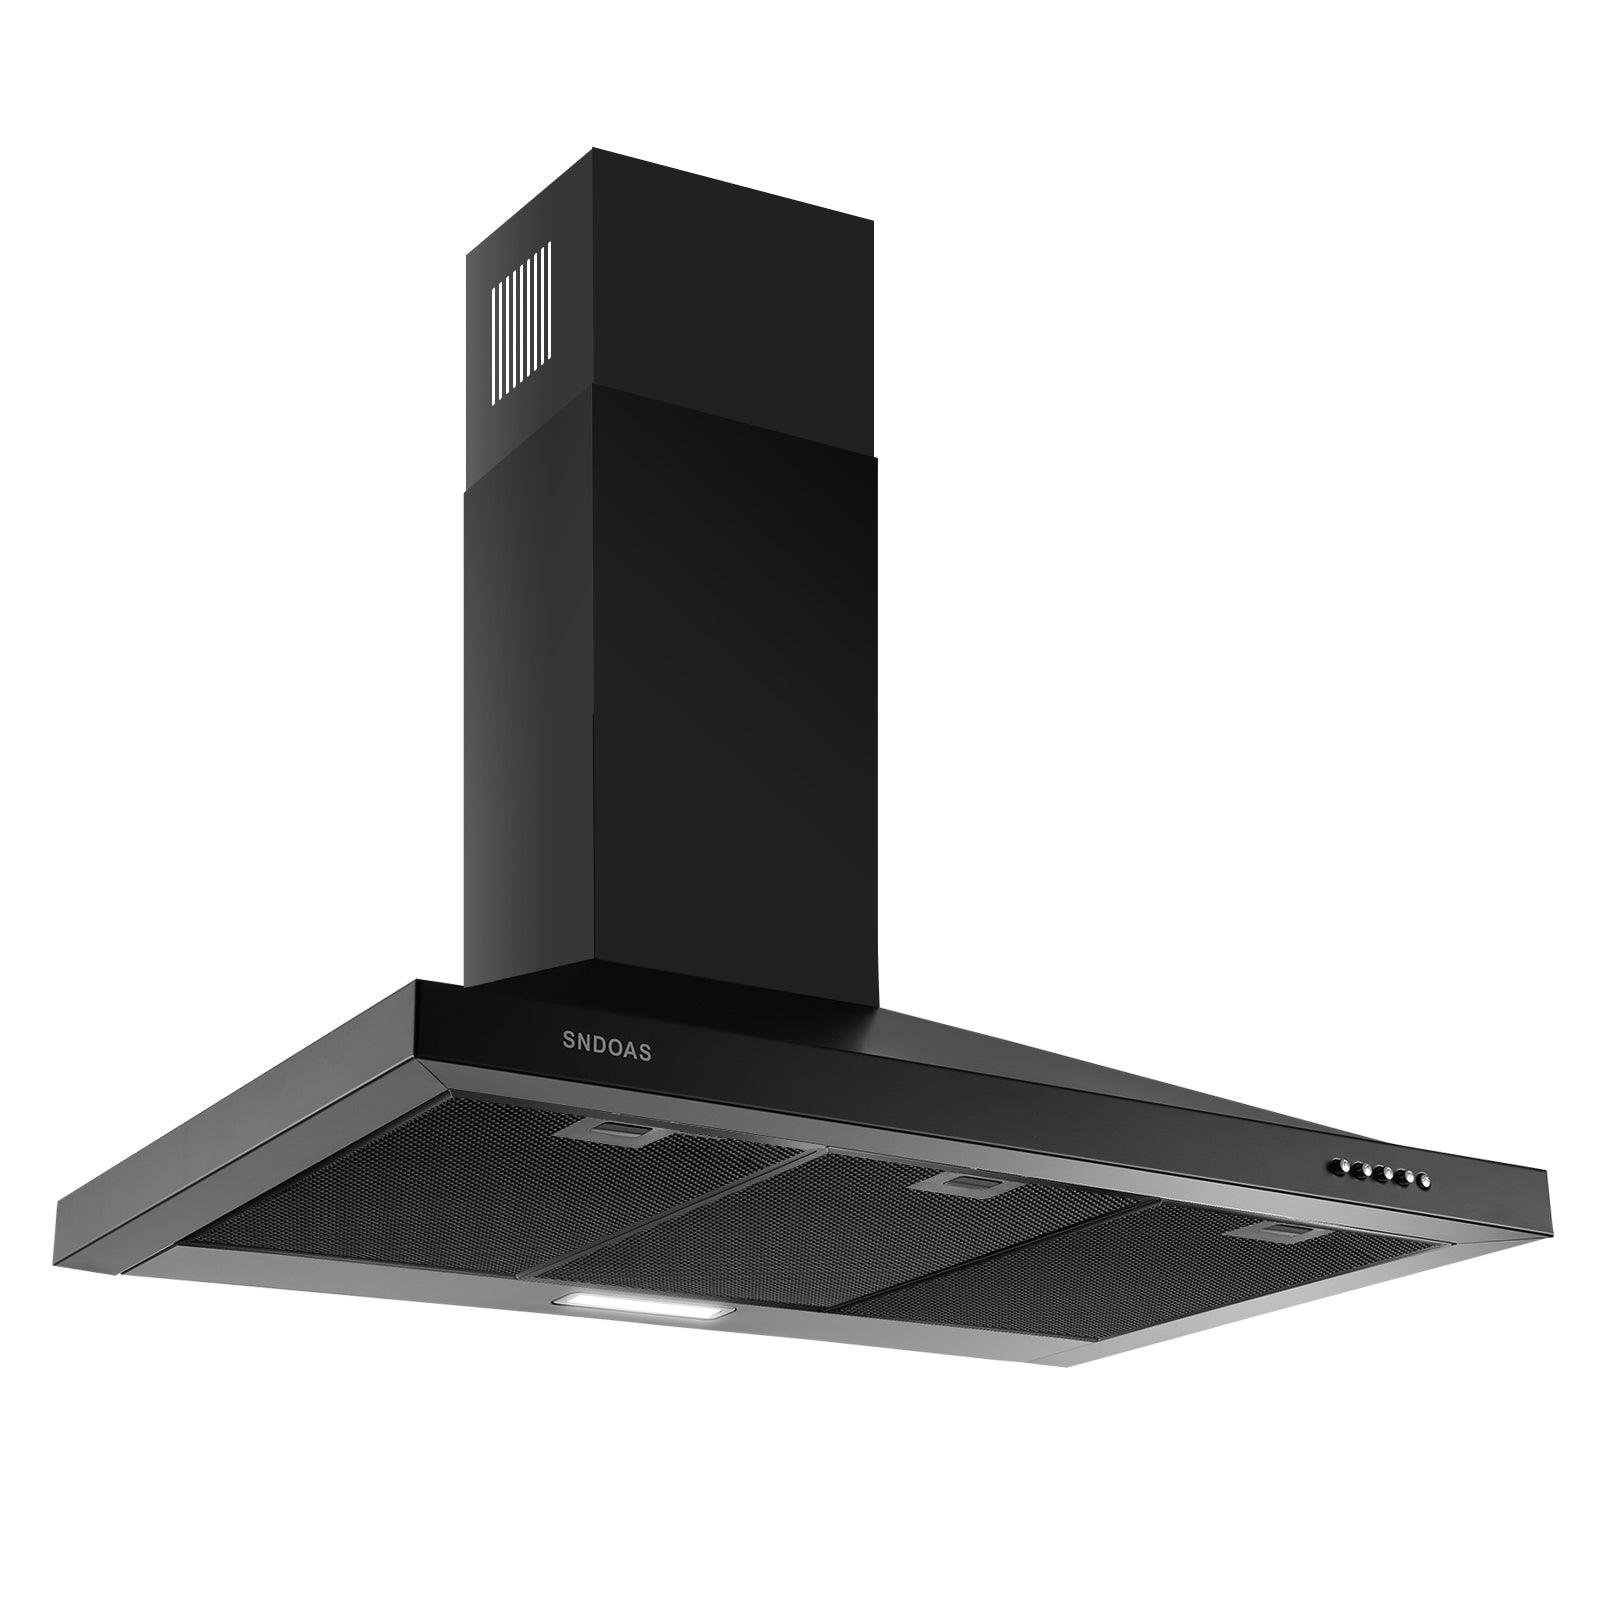 Tieasy 36 inch Wall Mount Range Hood Black 450 CFM Stove Vent with 3 Speed Fan